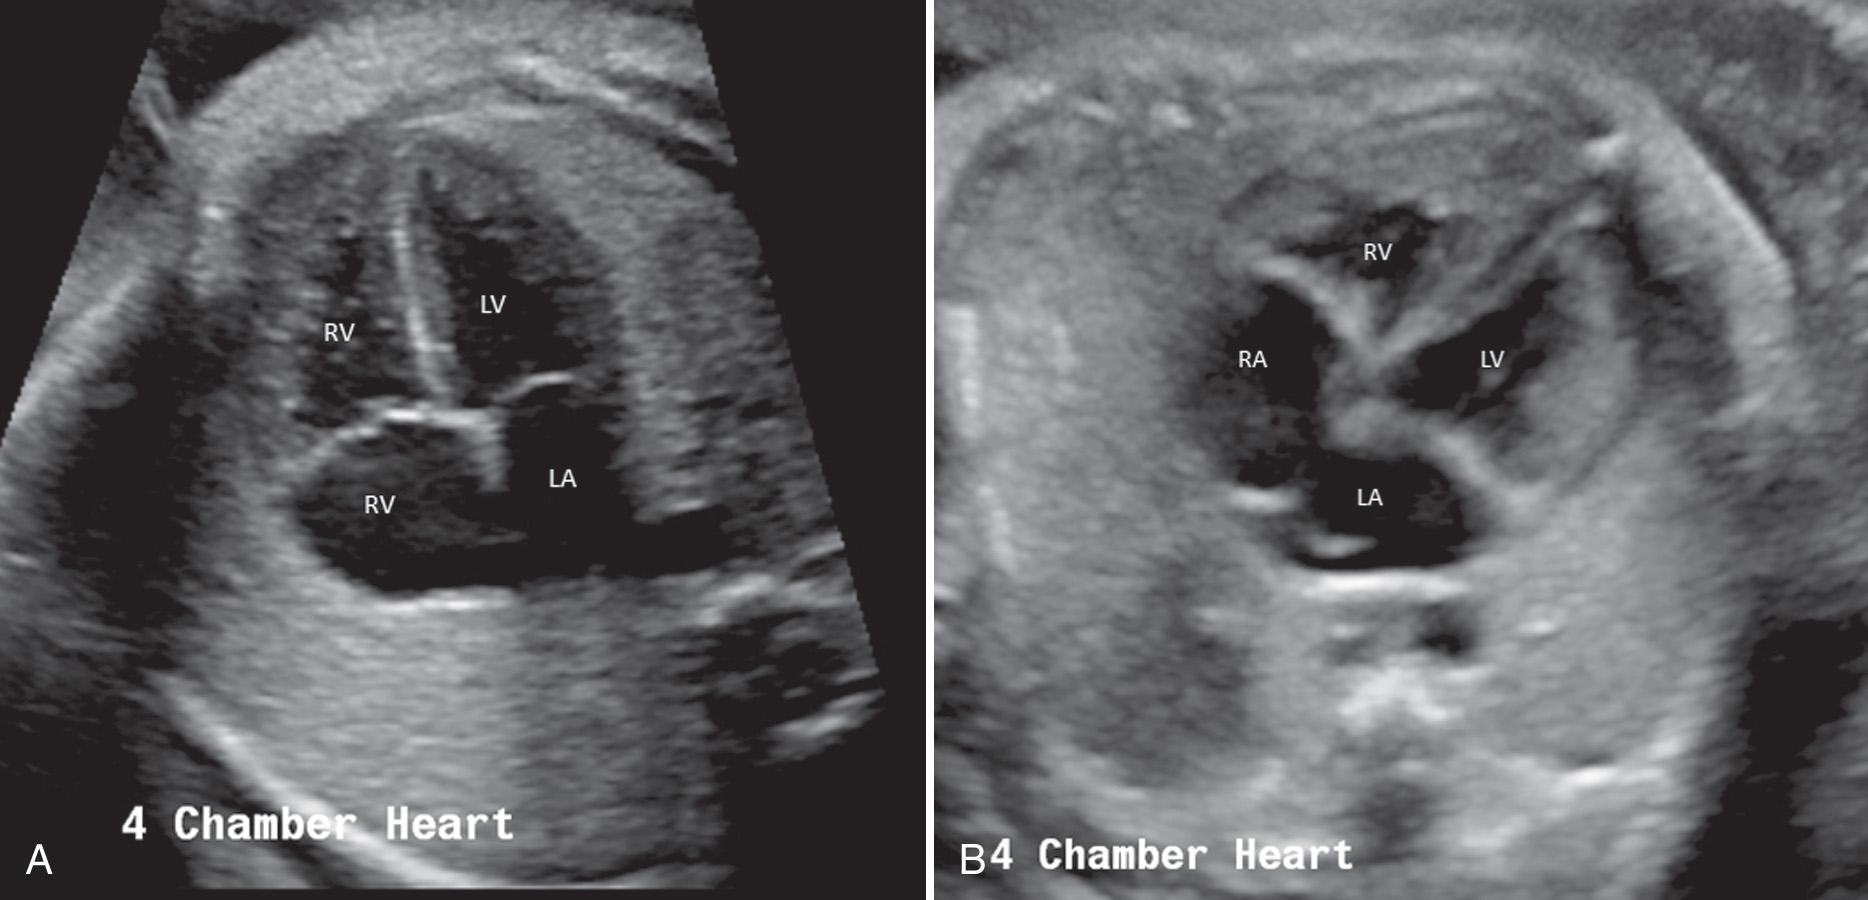 FIG. 37.5, Four-Chamber View of Heart.